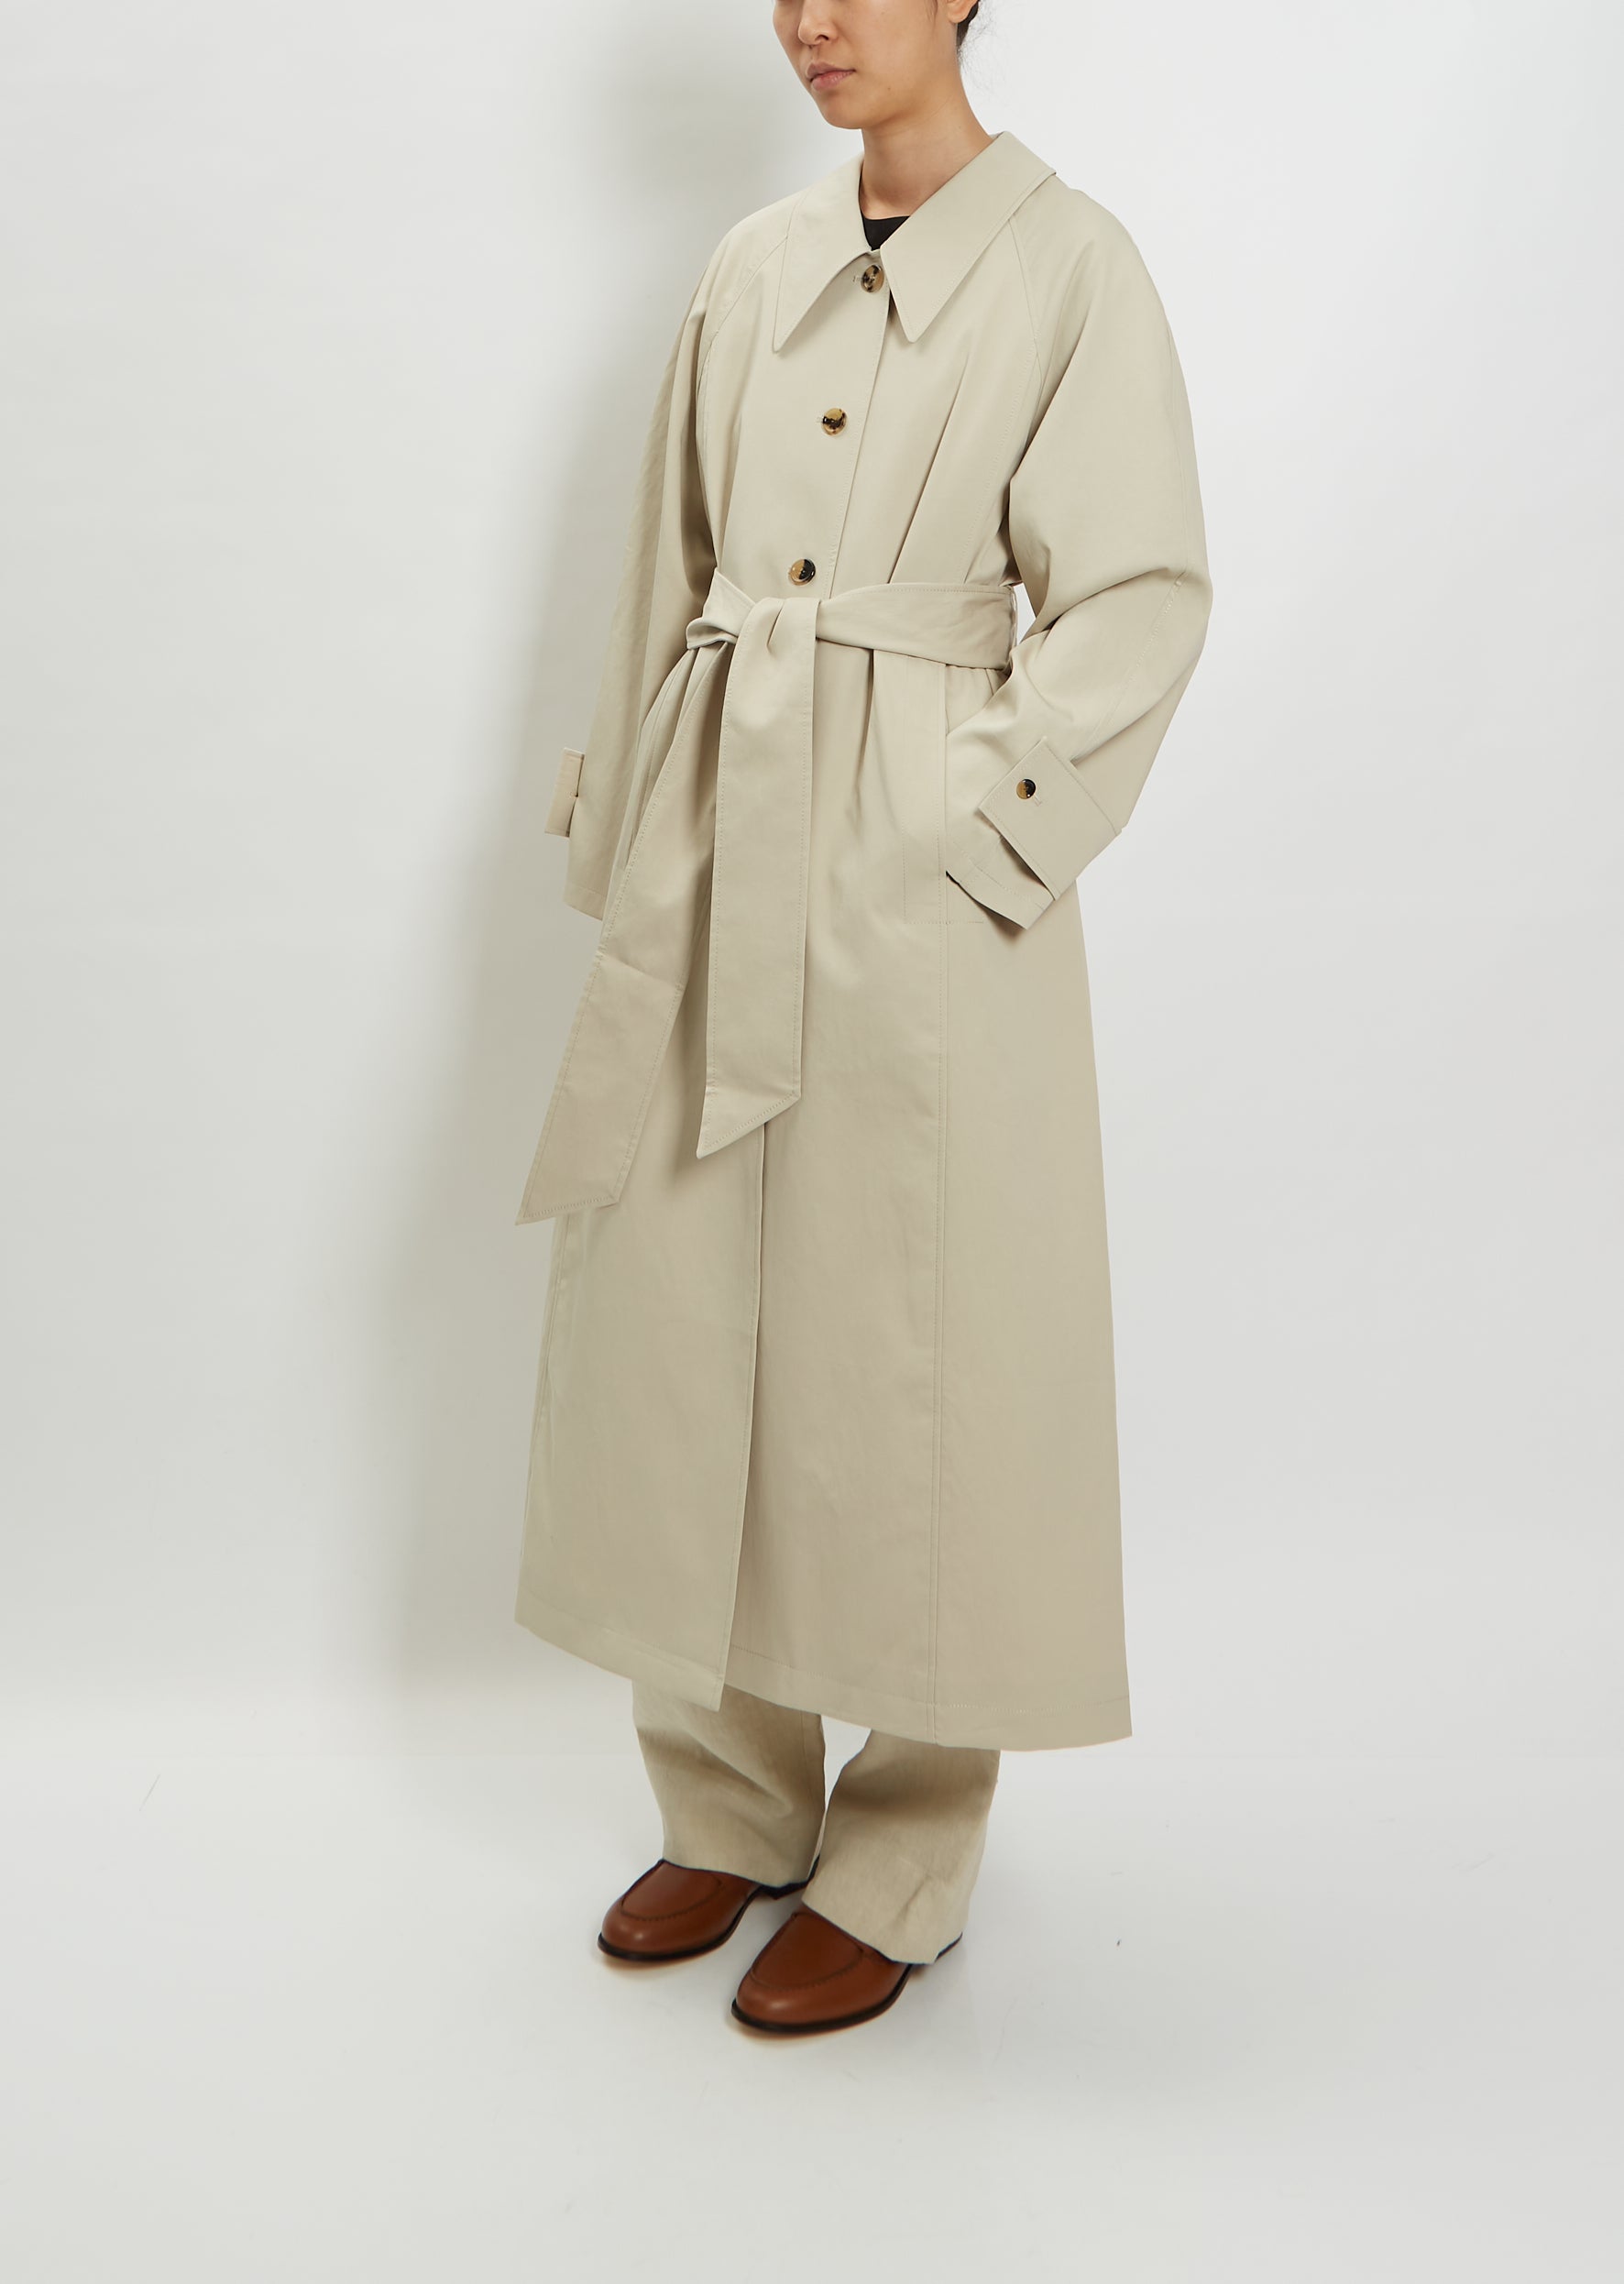 A Transitional Trench w/ the Classics..